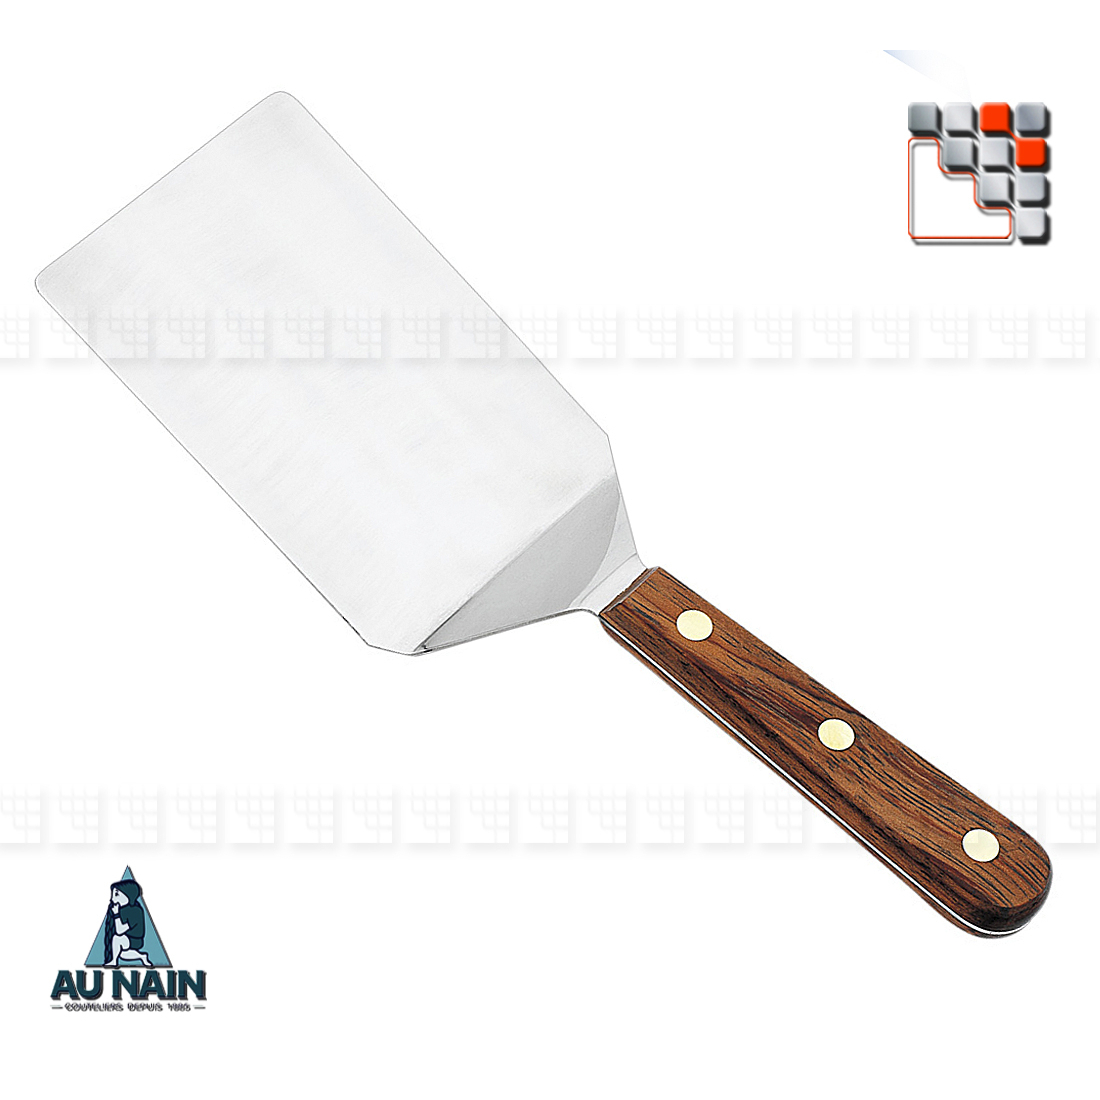 Flexible Elbow Spatula Rosewood 16 AUNAIN A38-1360301 AU NAIN® Coutellerie Special Kitchen Plancha